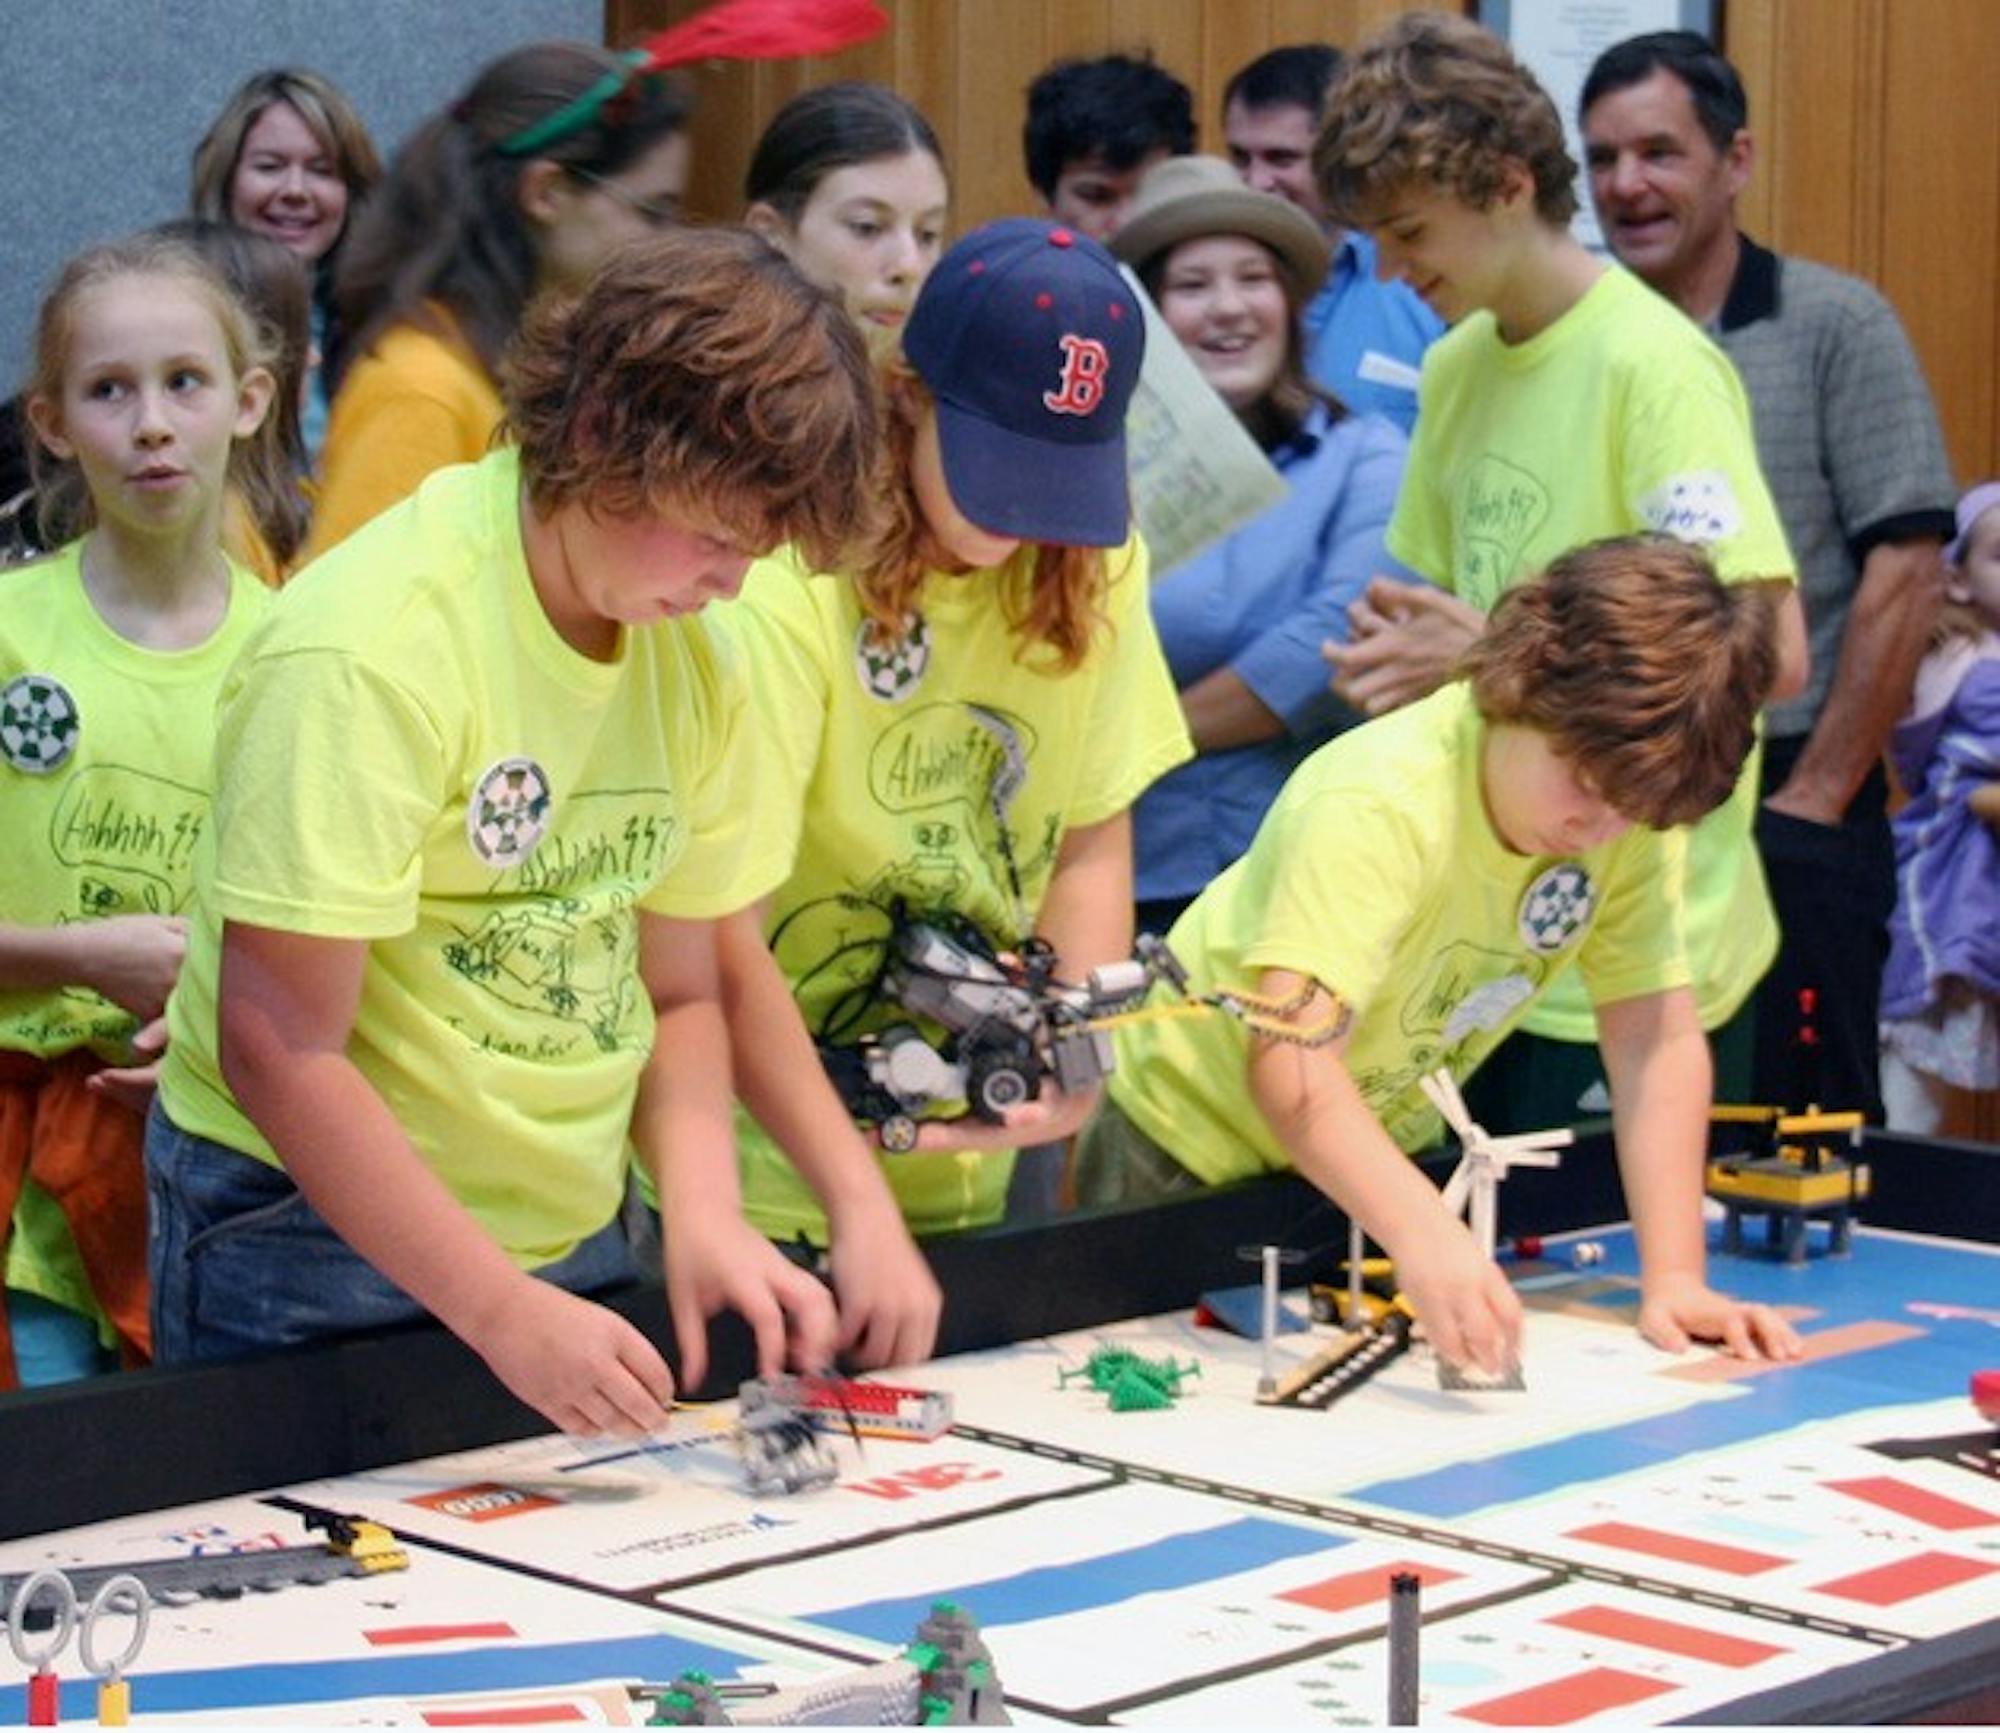 The Dartmouth Area Robotics Tournament brought 16 teams of middle school students together to pit their Lego creations against one another.